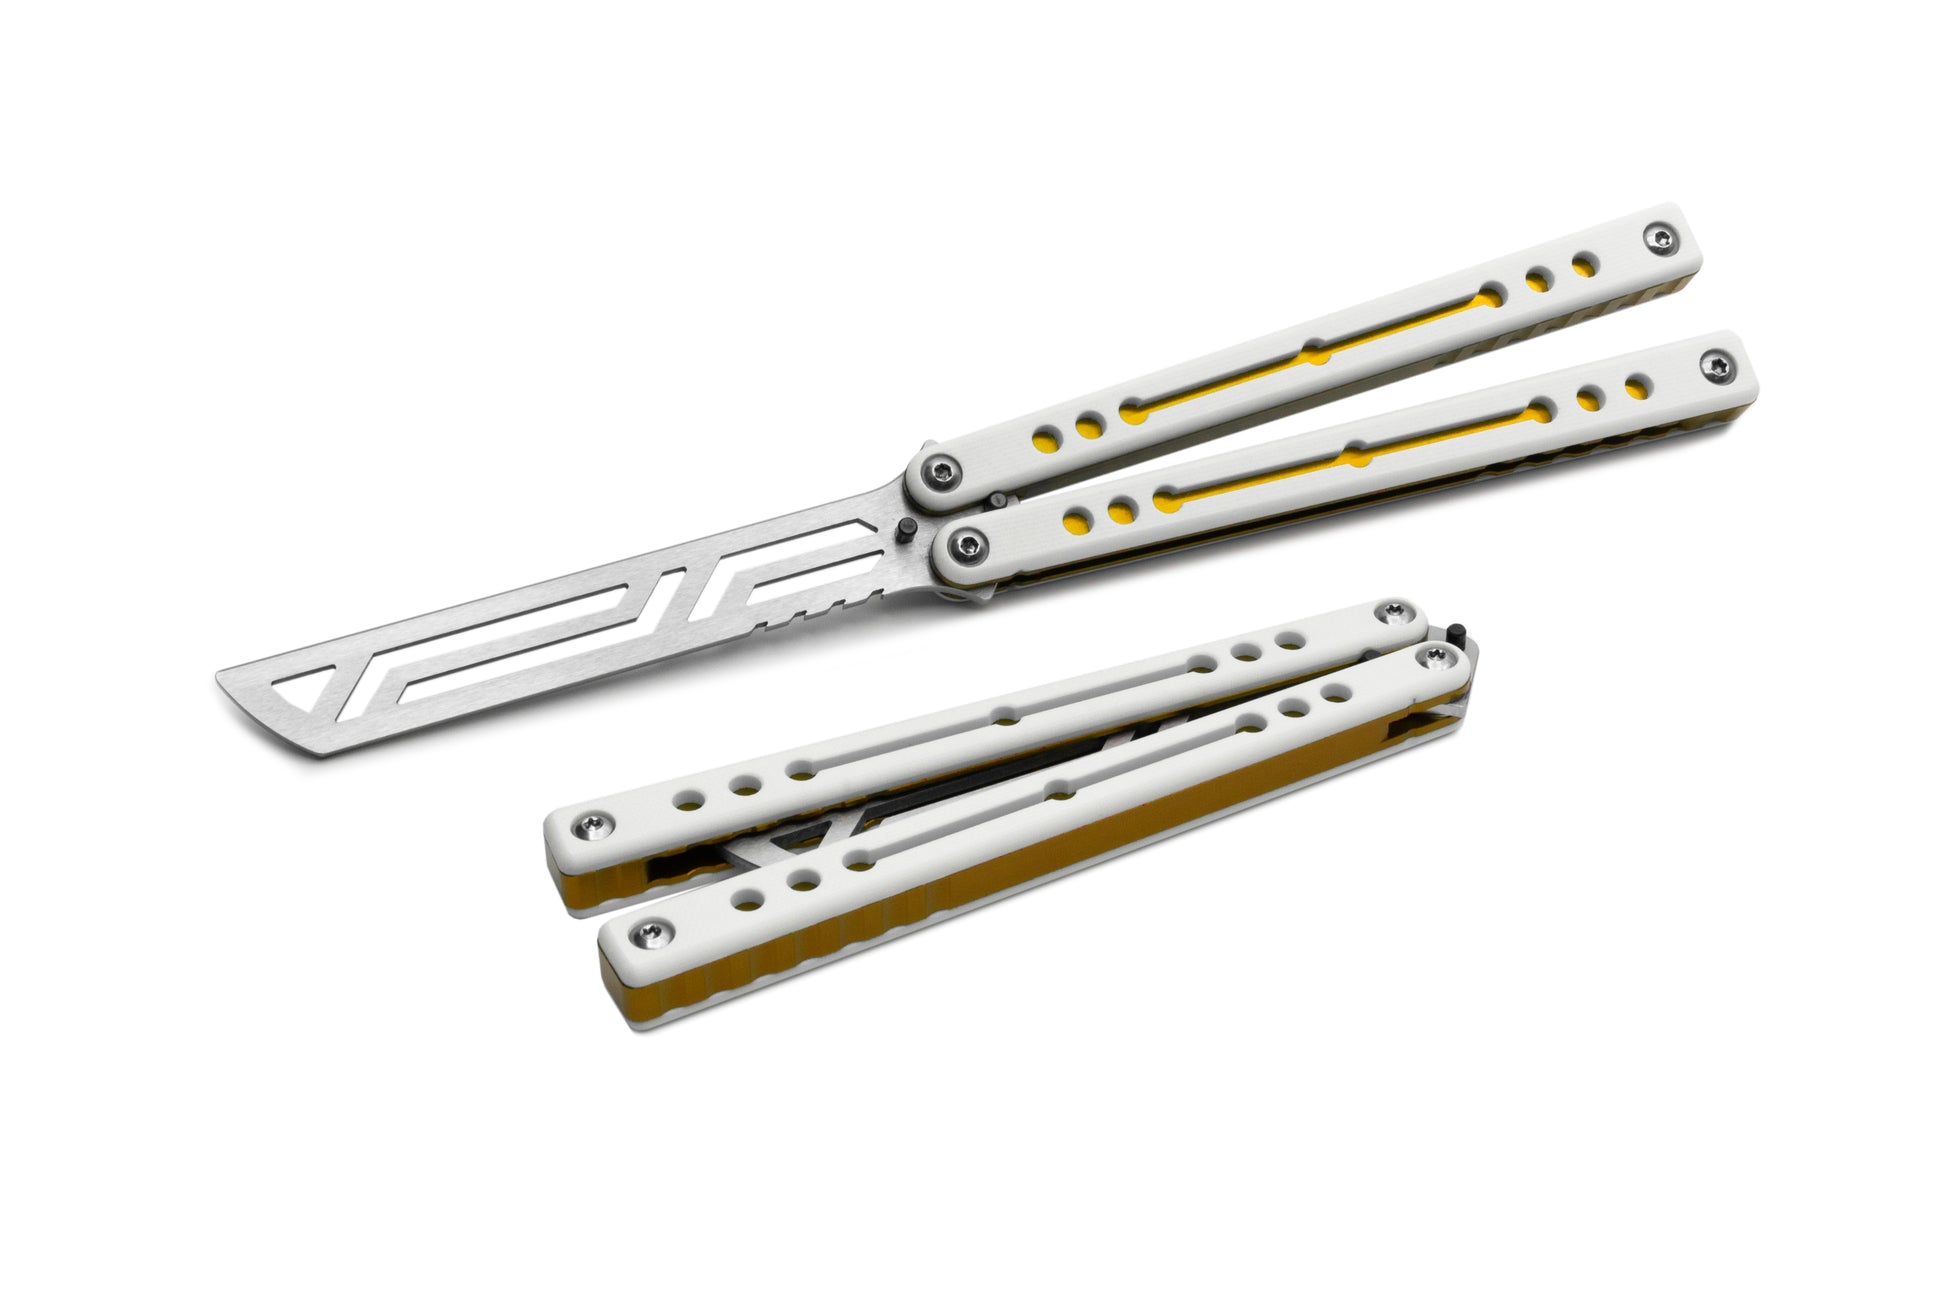 Winter Gold NautilusV2 balisong with g10 scales